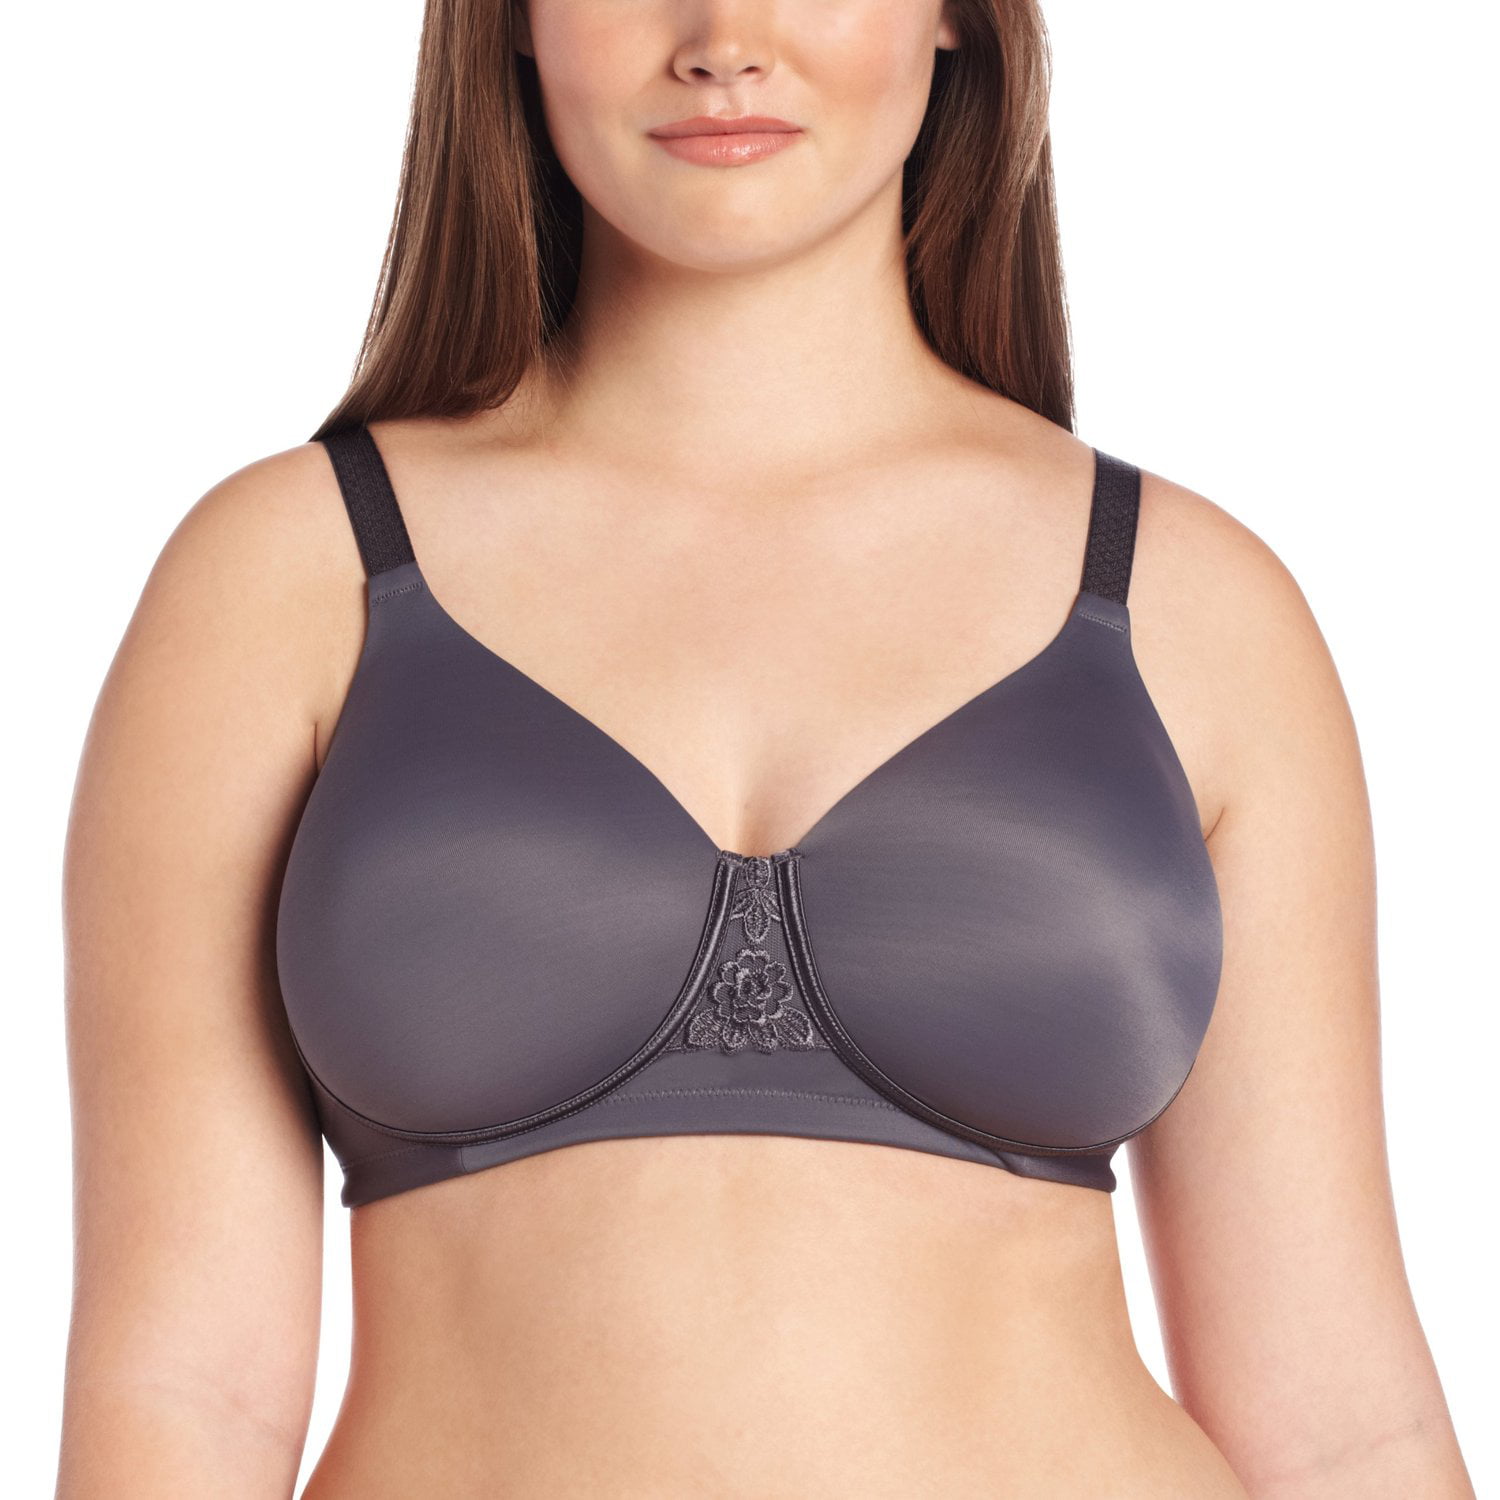 szmaold Womens Plus Size Full Back Coverage Bras, Wirefree Deep